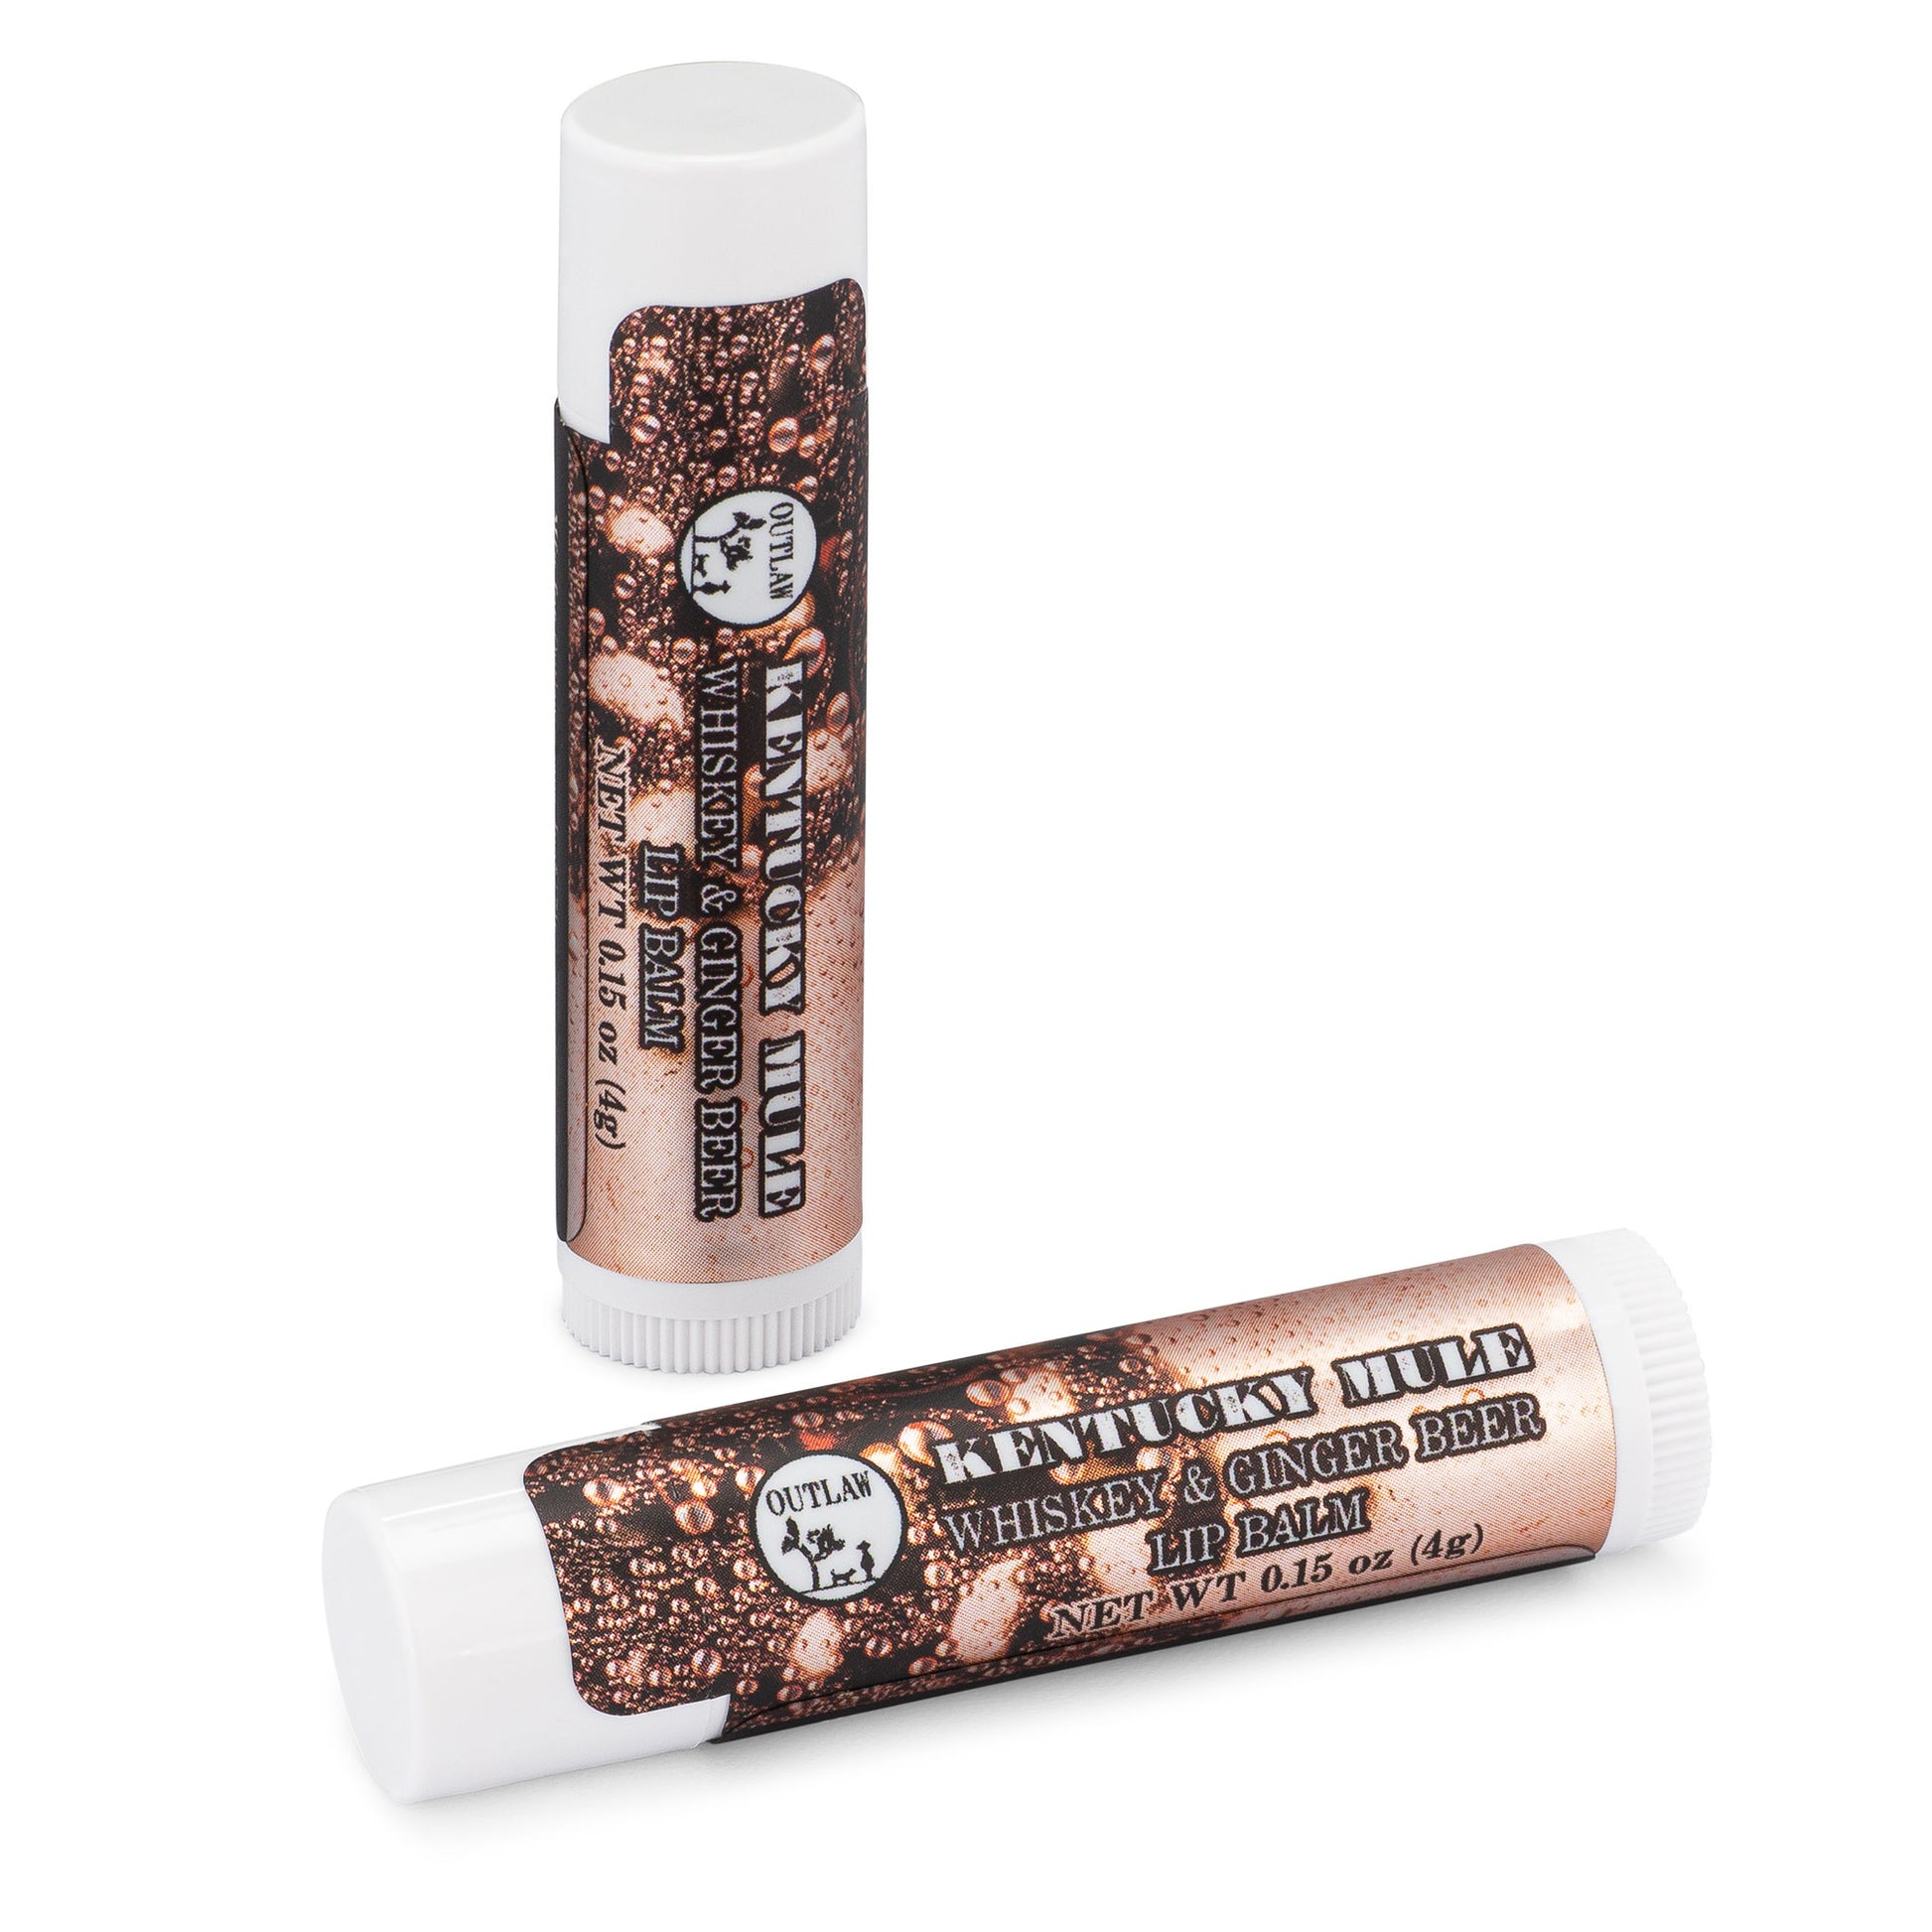 Outlaw Kentucky Mule whiskey and ginger beer flavored lip balm